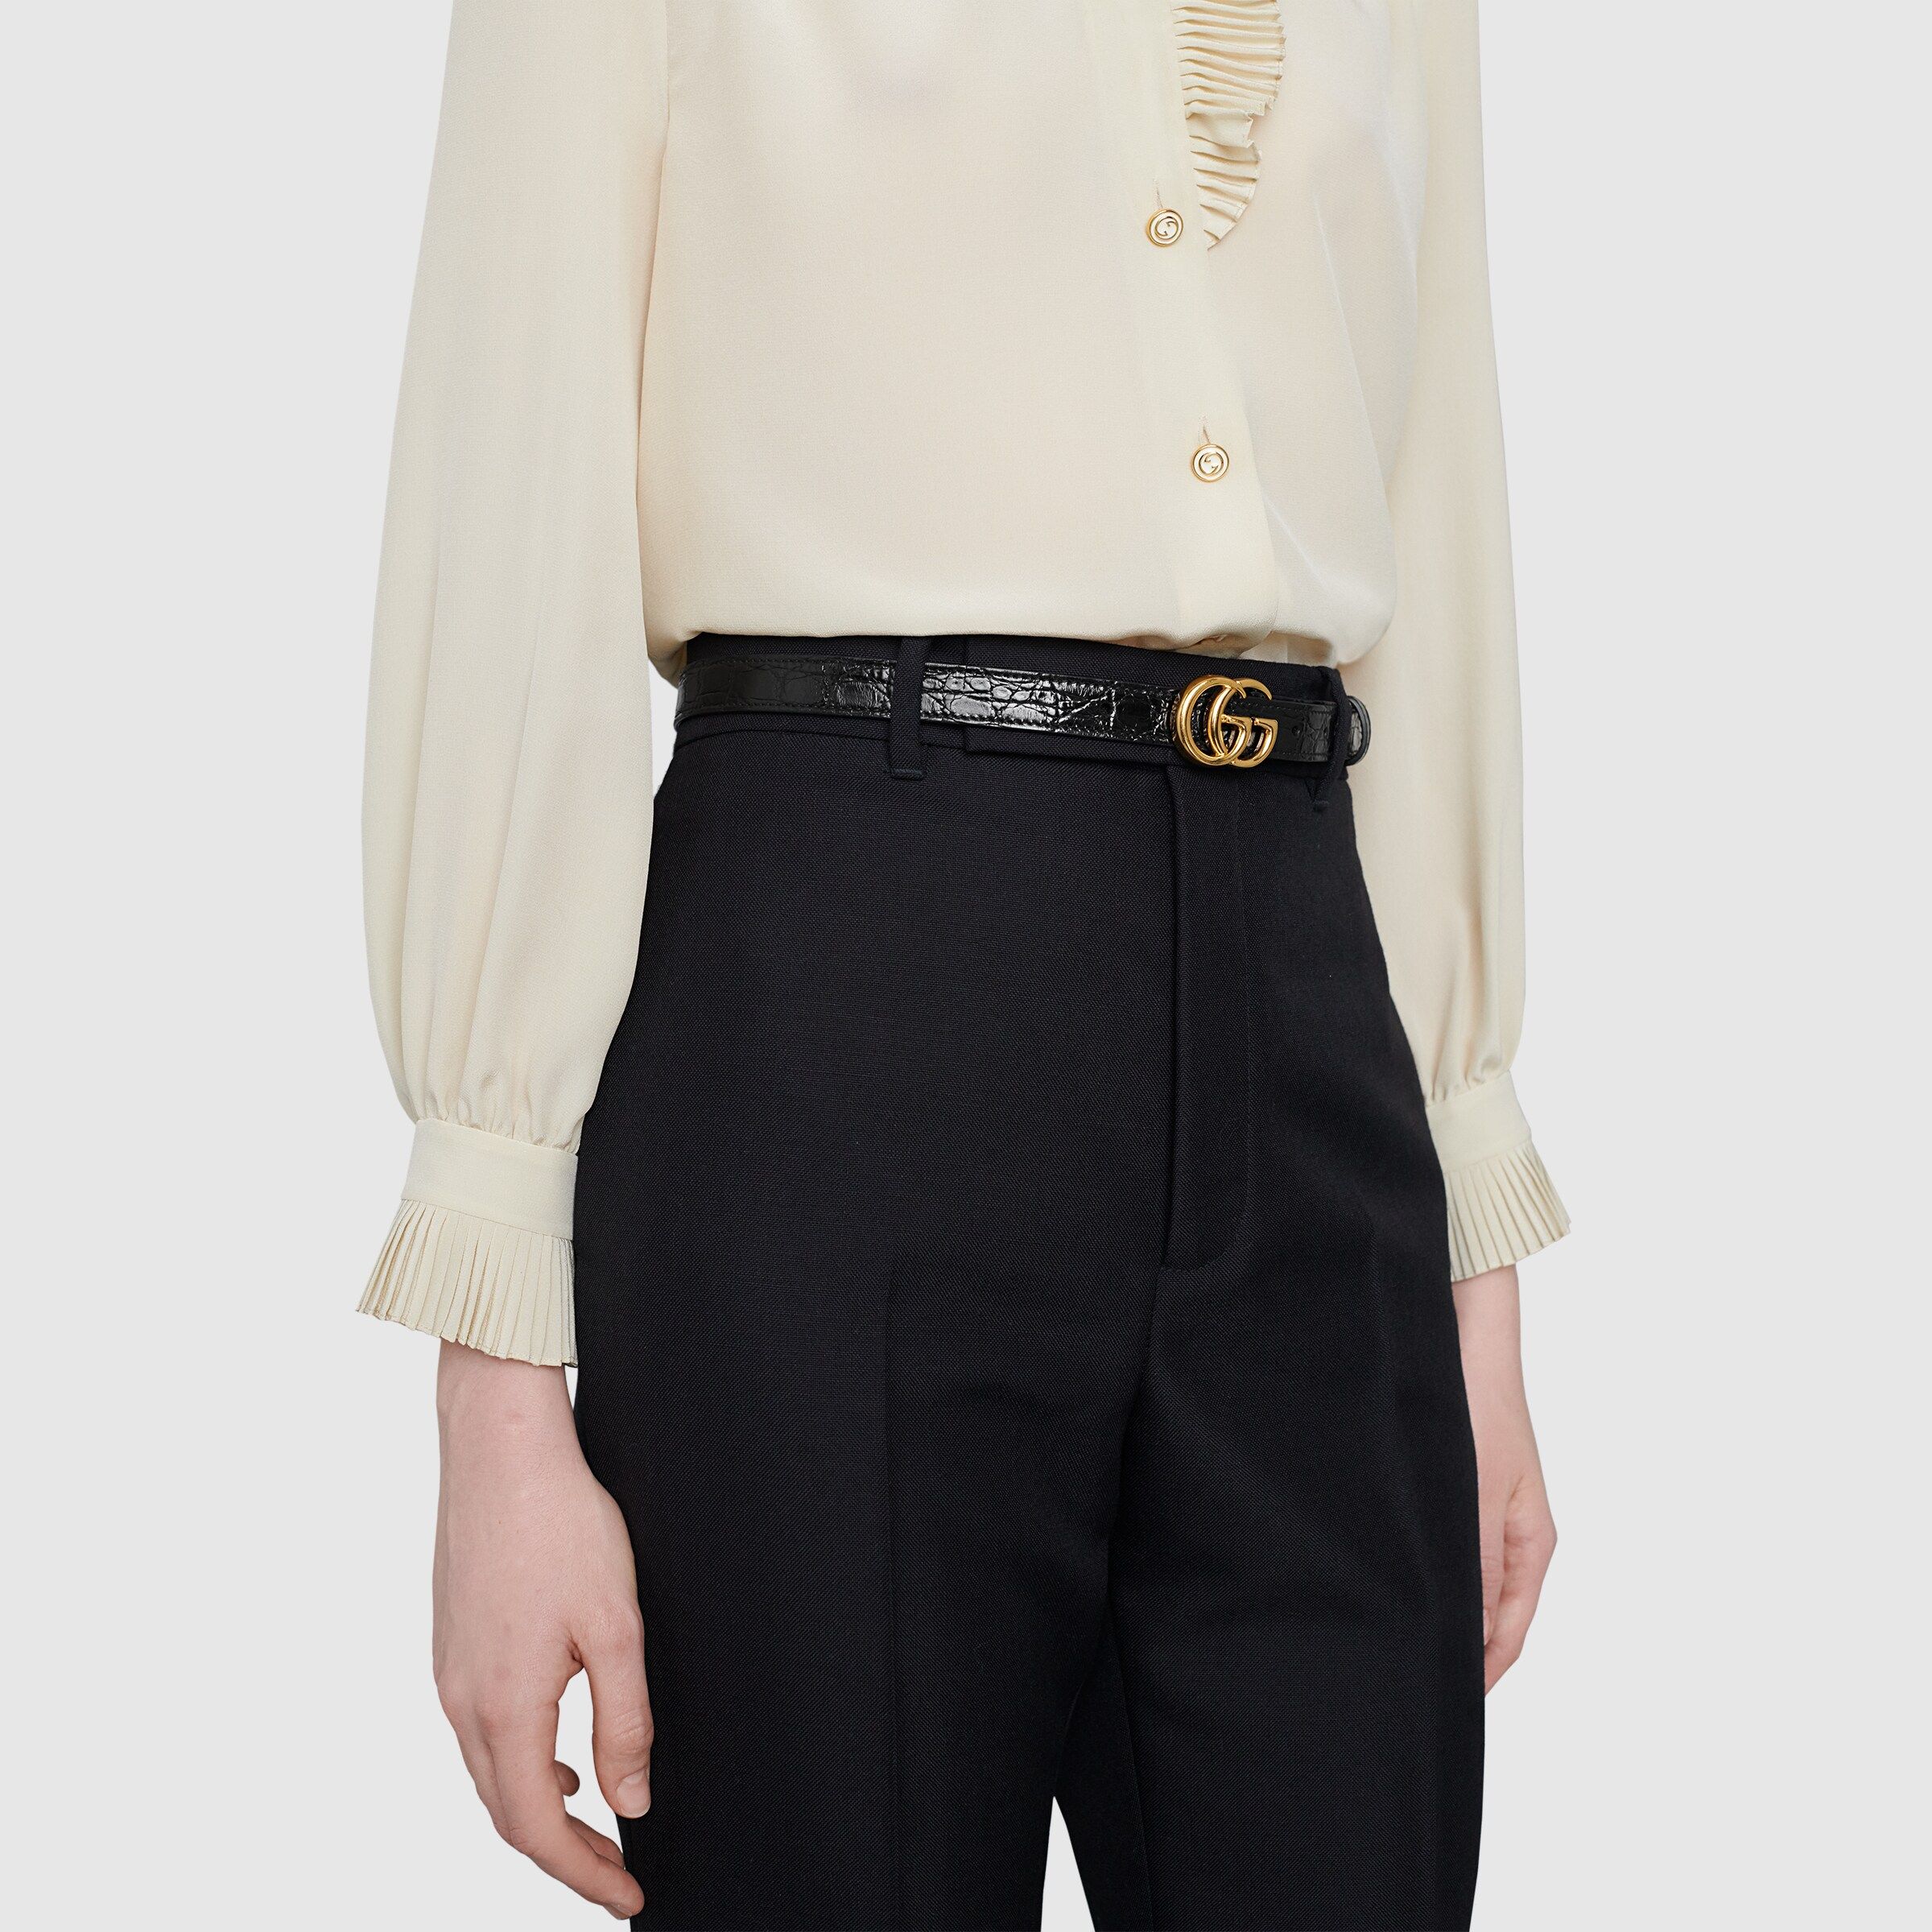 GG Marmont thin caiman belt with shiny buckle | Gucci (US)